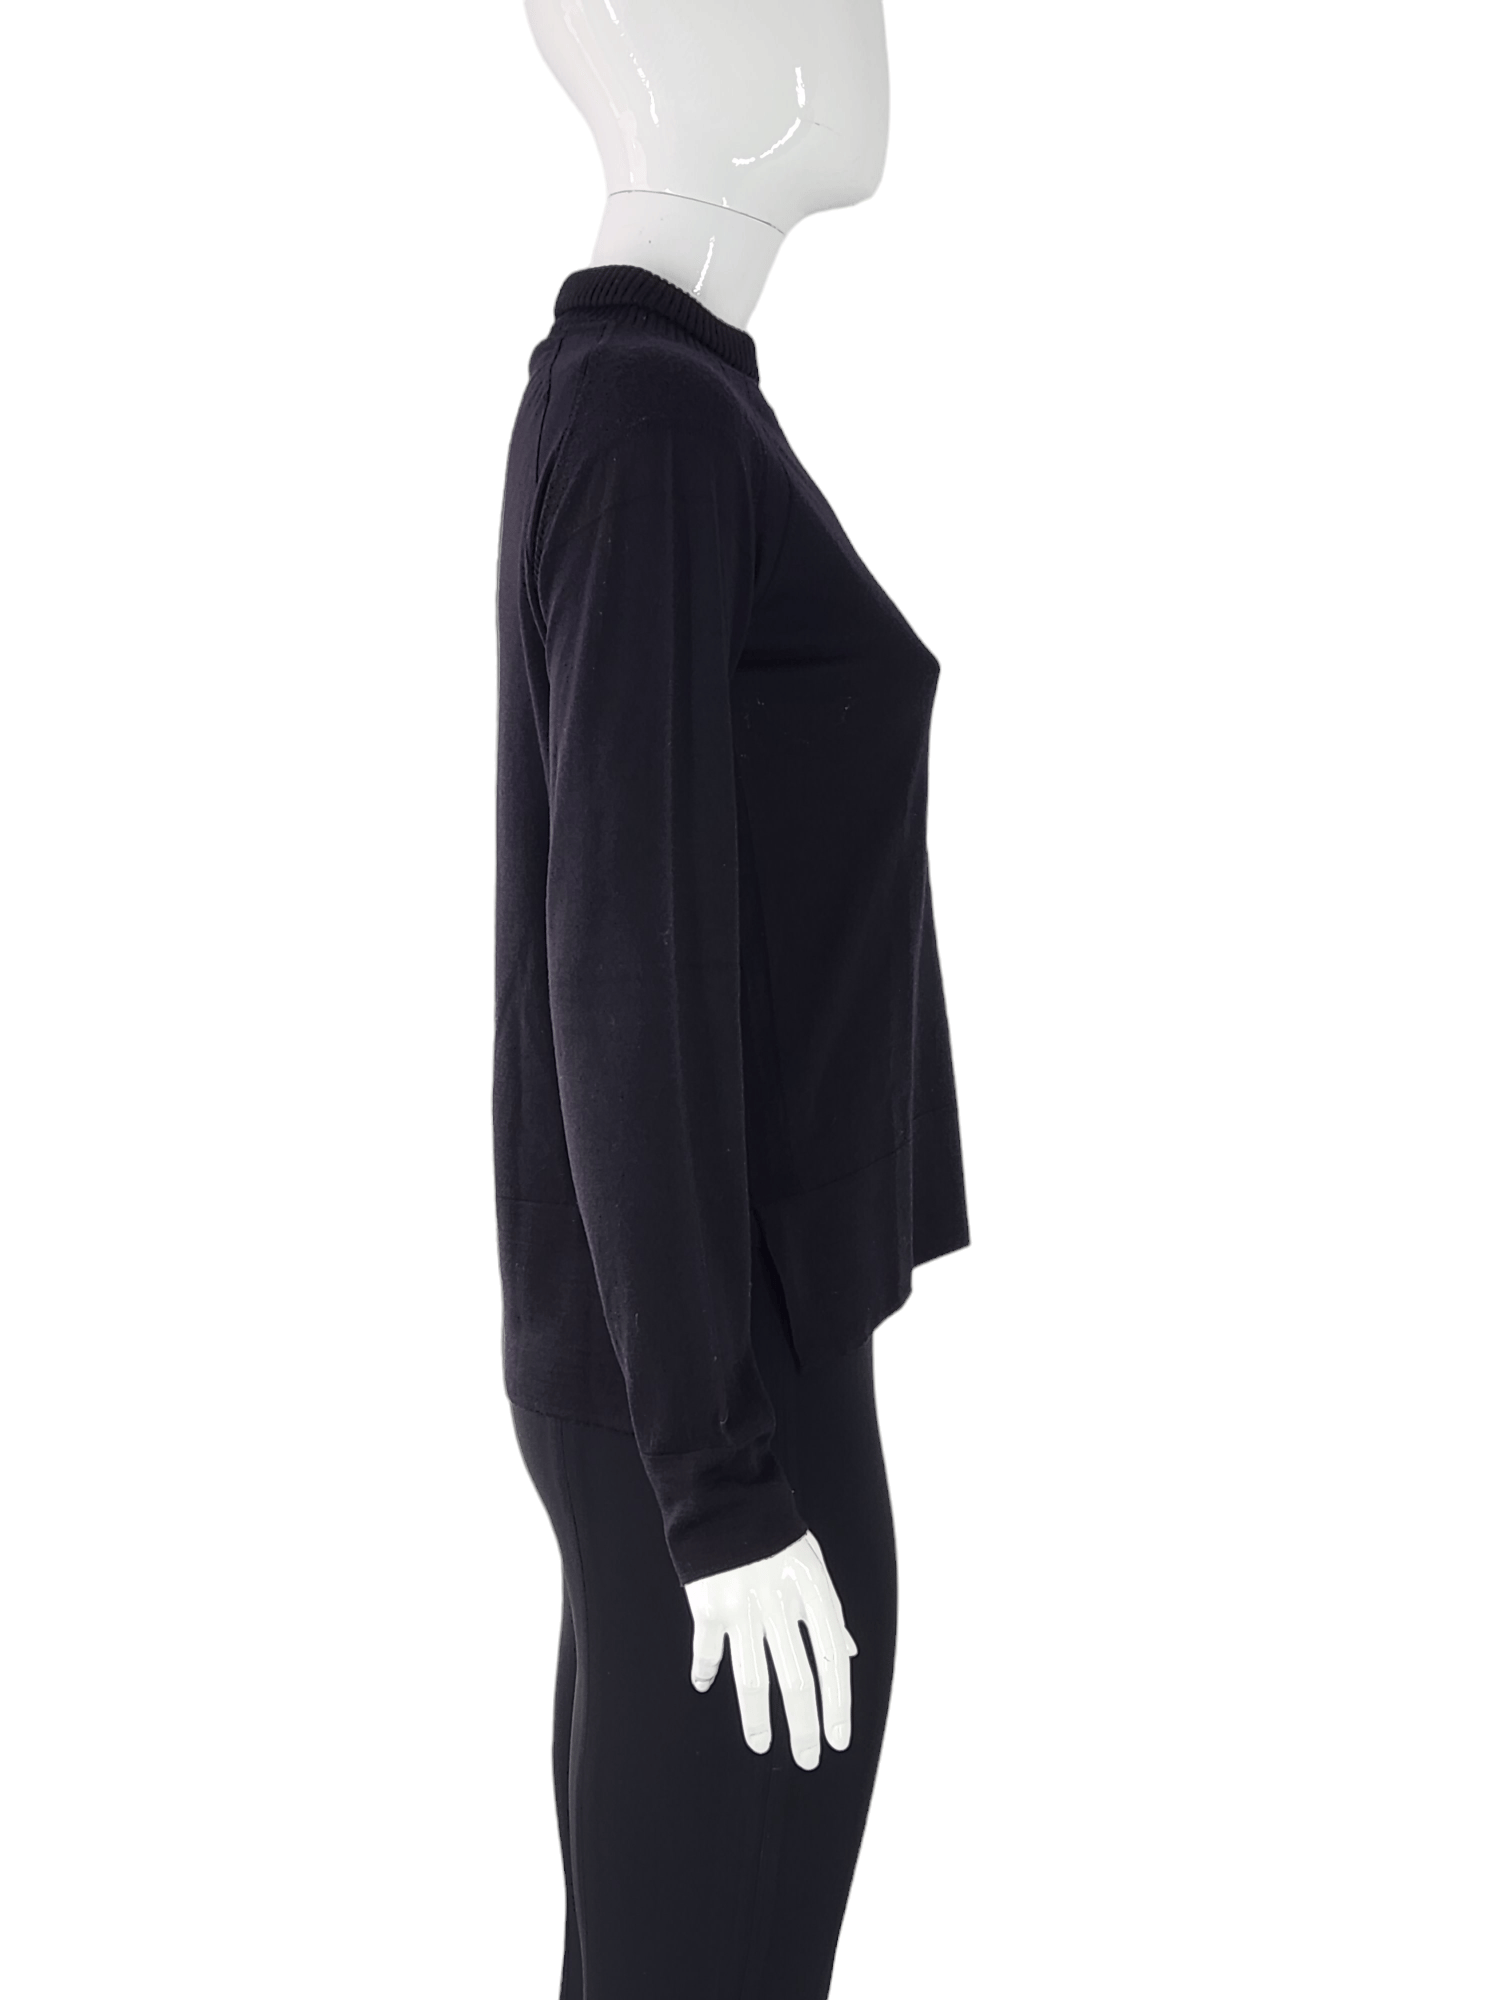 Moncler Black Wool Maglione Tricot Girocollo Sweater XS